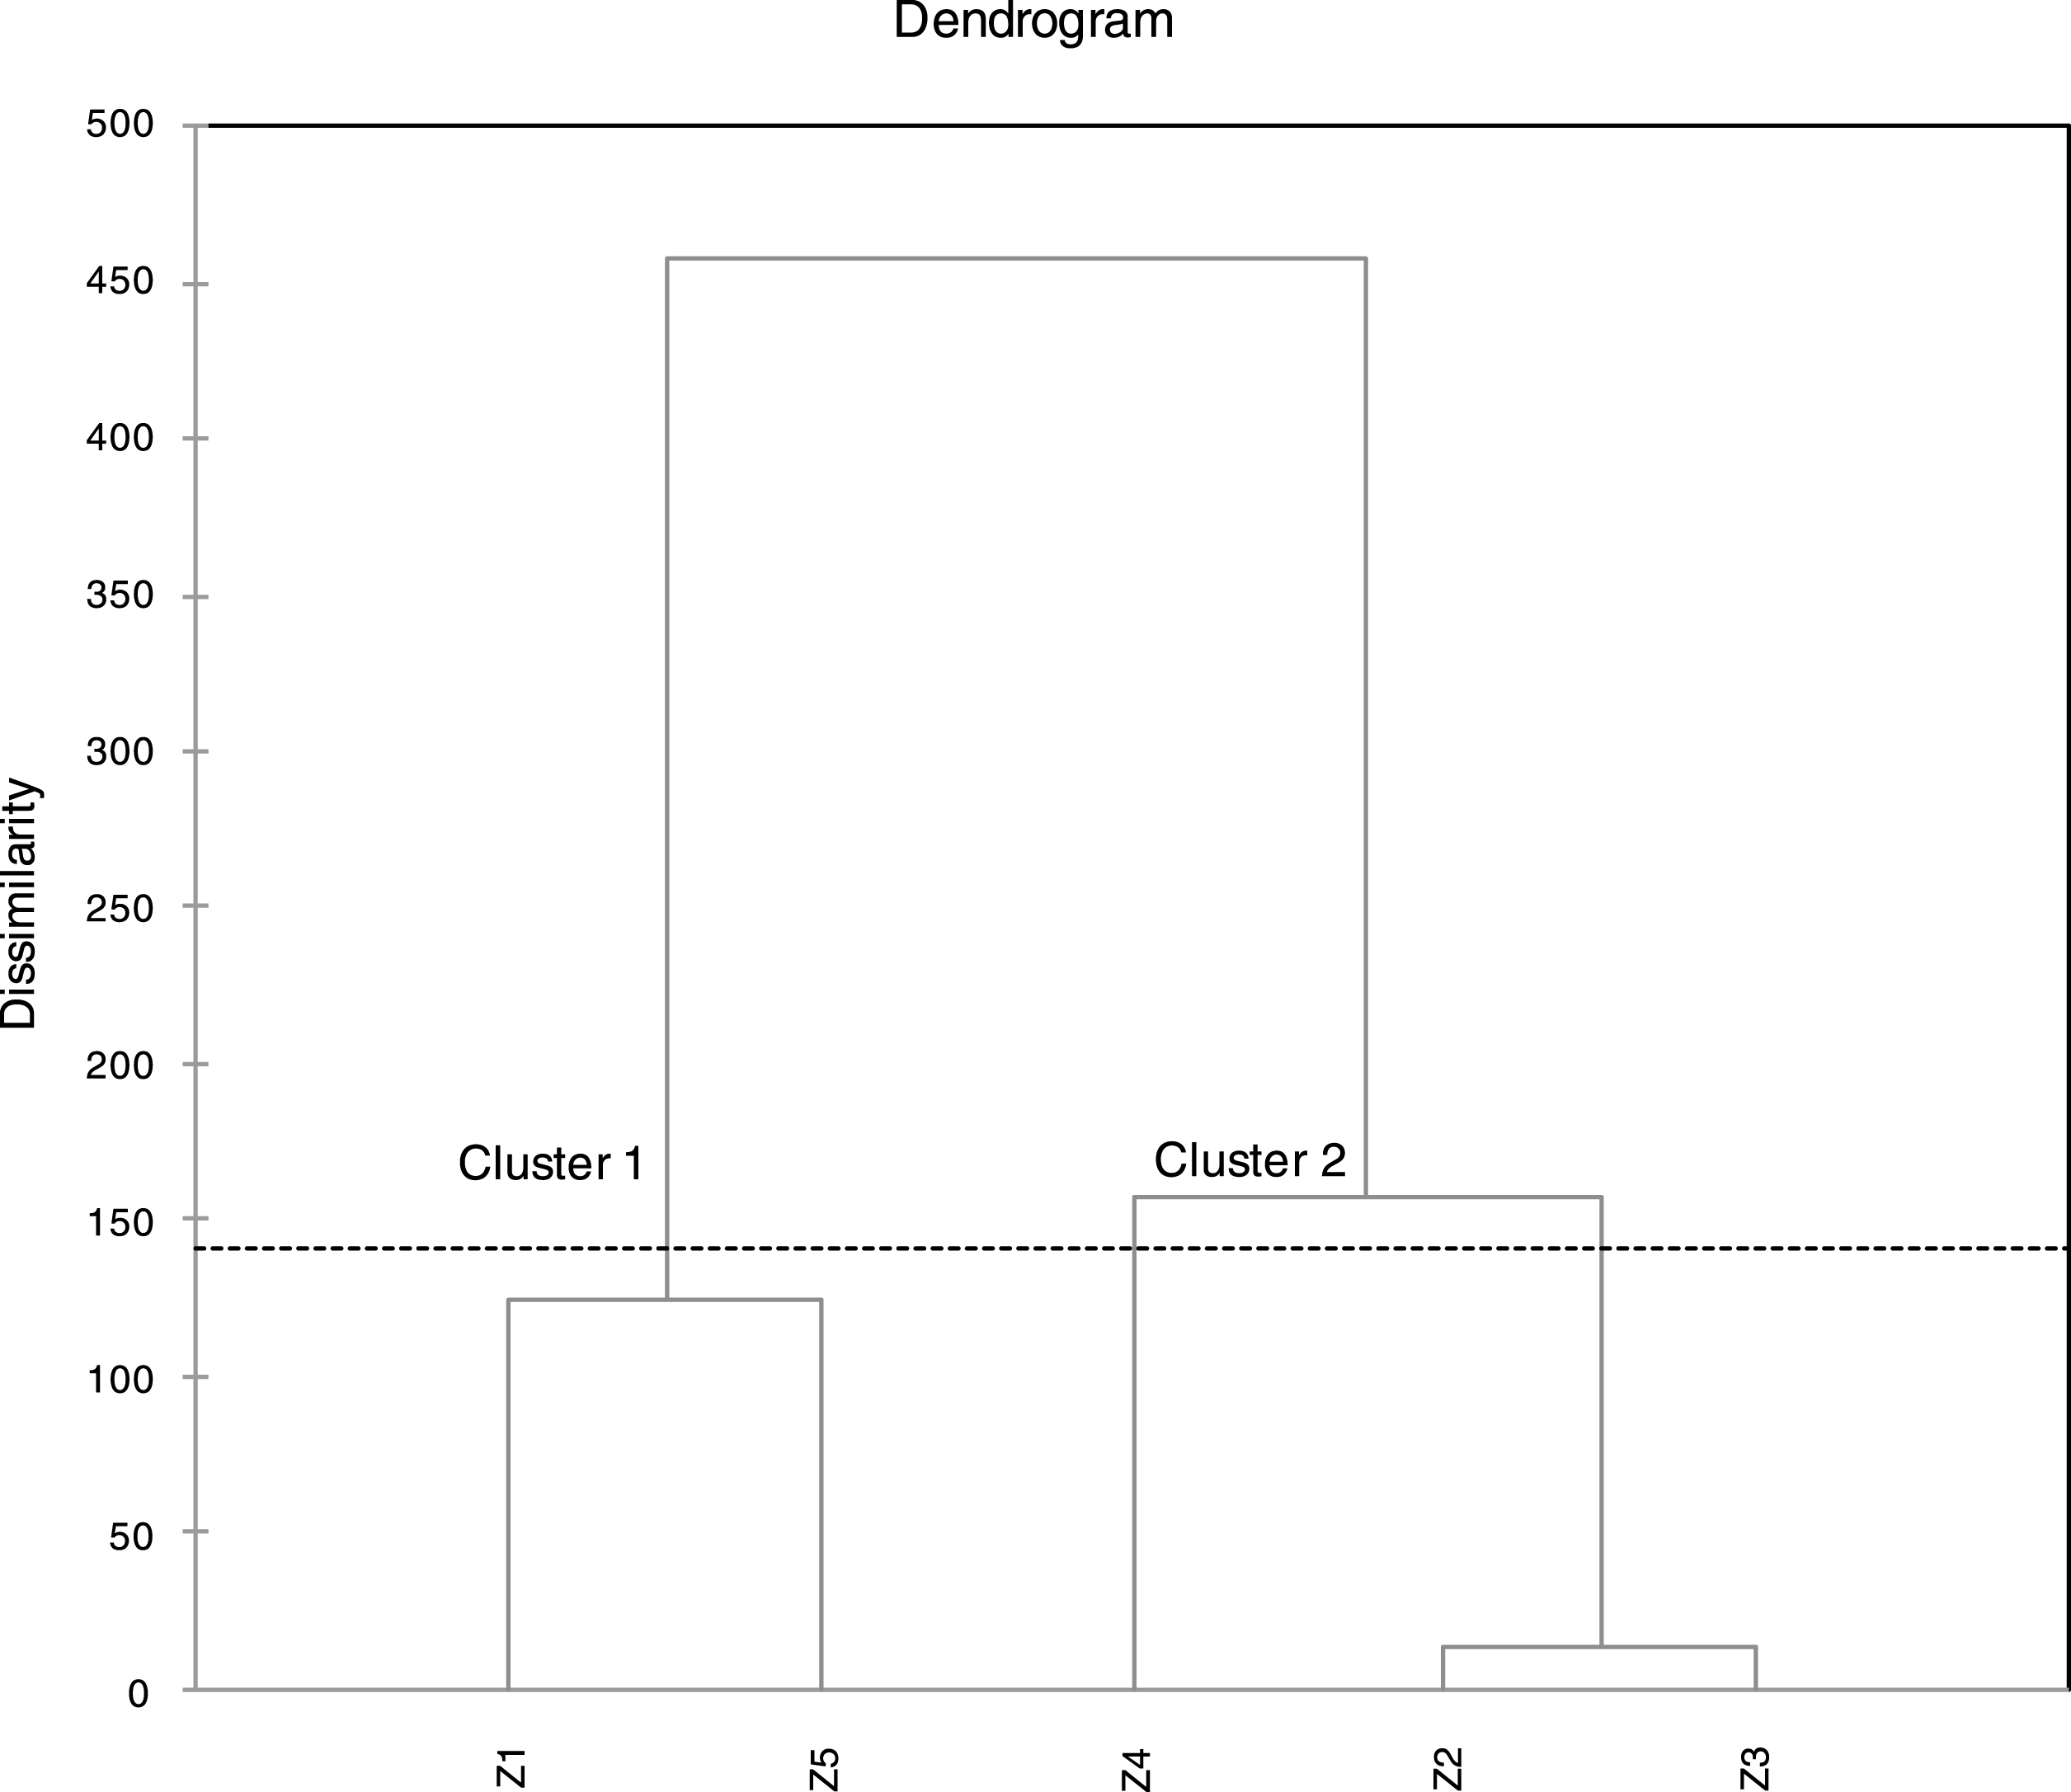 Dendrogram obtained from a cluster analysis of five samples of fatty acids of Algerian Pistacia lentiscus leaves. Samples are clustered using Ward’s technique with a Euclidean distance measure.